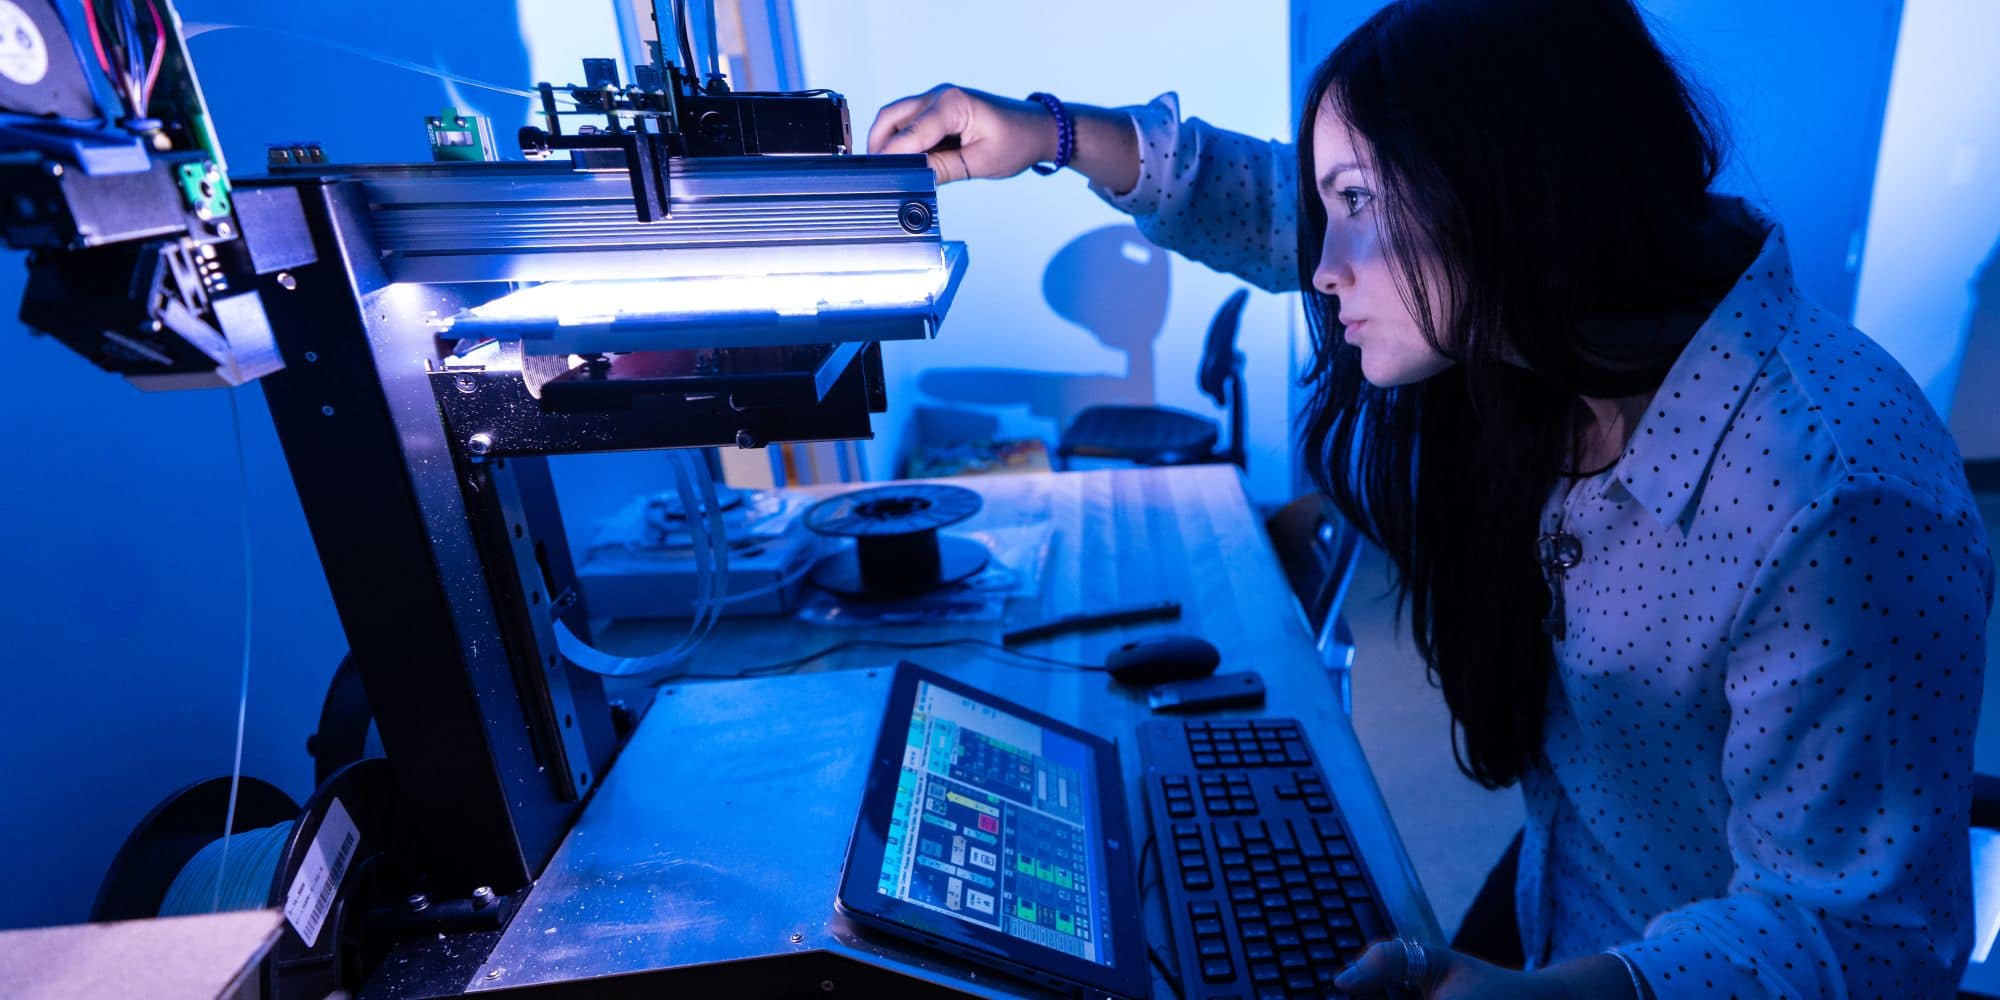 Embry-Riddle Graduate Student Noemi Miguelez works in the parts manufacturing section of the WiDE lab at the MicaPlex